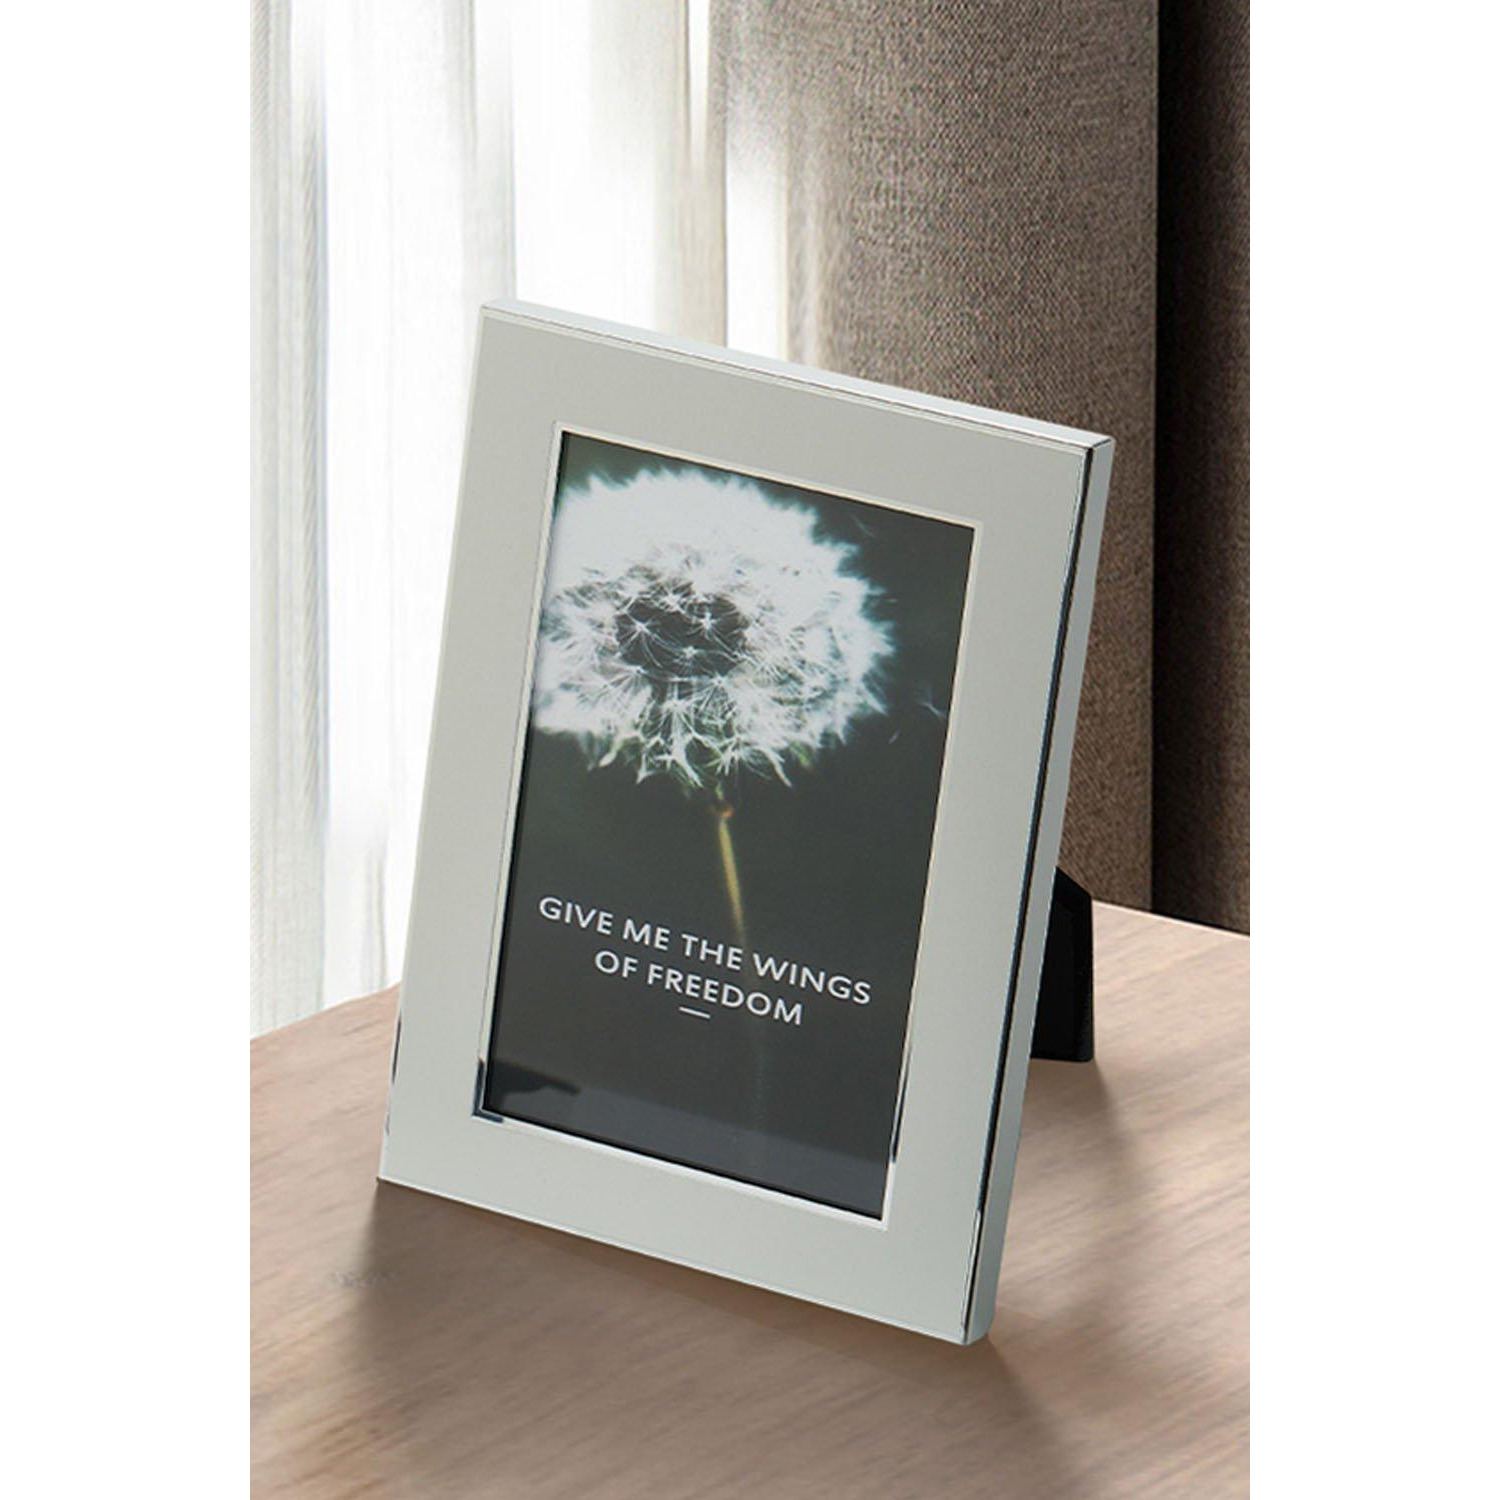 6 x 8 Inch Silver Fashionable Photo Frames with Stand - image 1